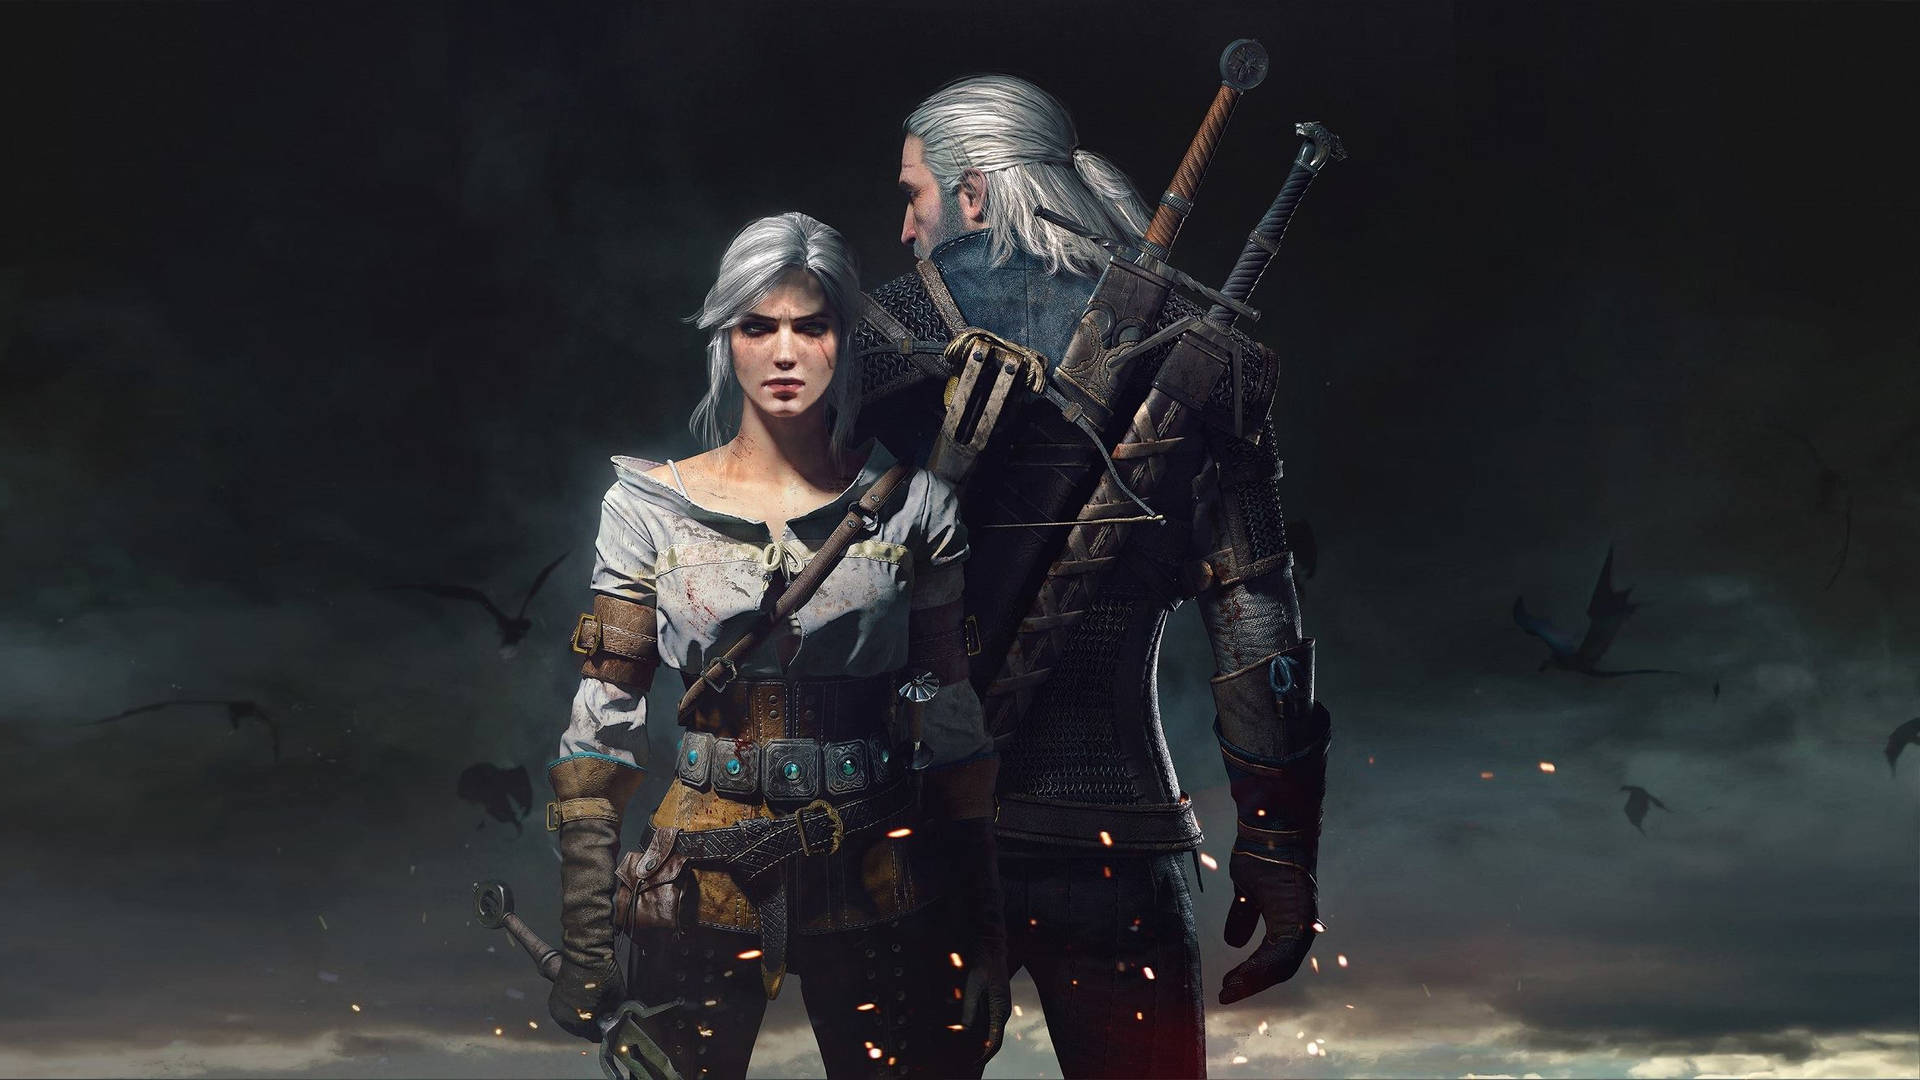 Join Geralt of Rivia in the exciting world of The Witcher 3! Wallpaper